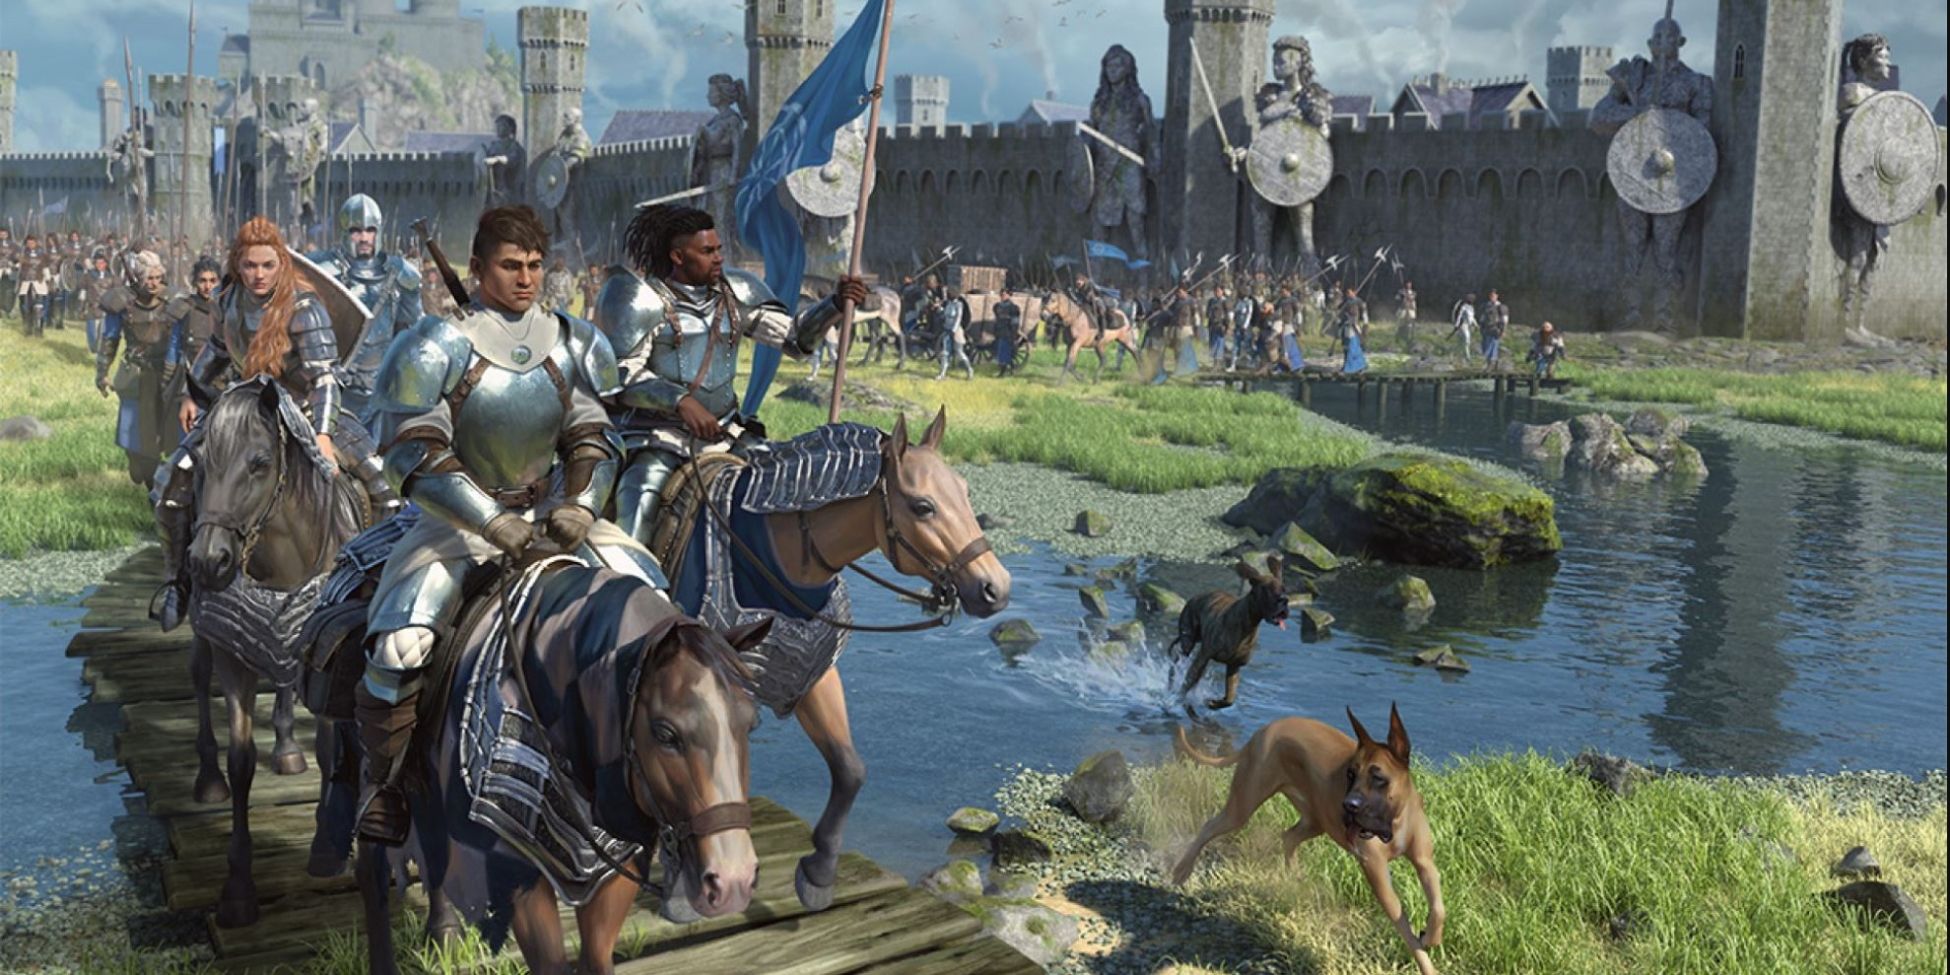 Dragonlance knights on horseback lead a procession of soldiers over a small bridge and away from a walled city.